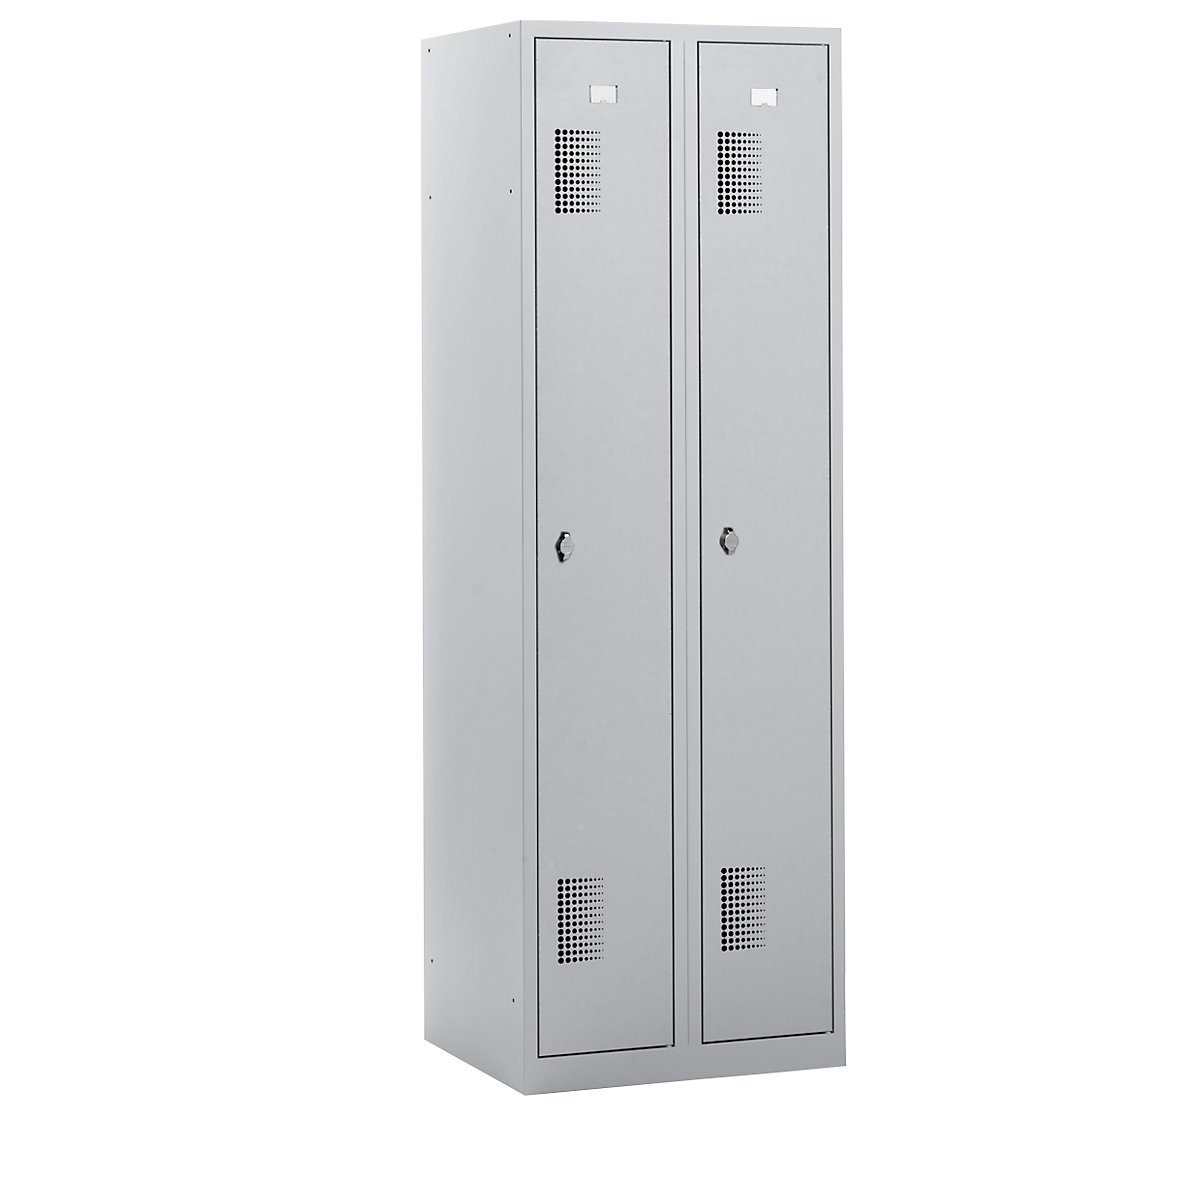 AMSTERDAM cloakroom locker – eurokraft basic, height 1800 mm, width 600 mm, 2 x 298 mm wide compartments, with fittings for padlock, completely light grey-12